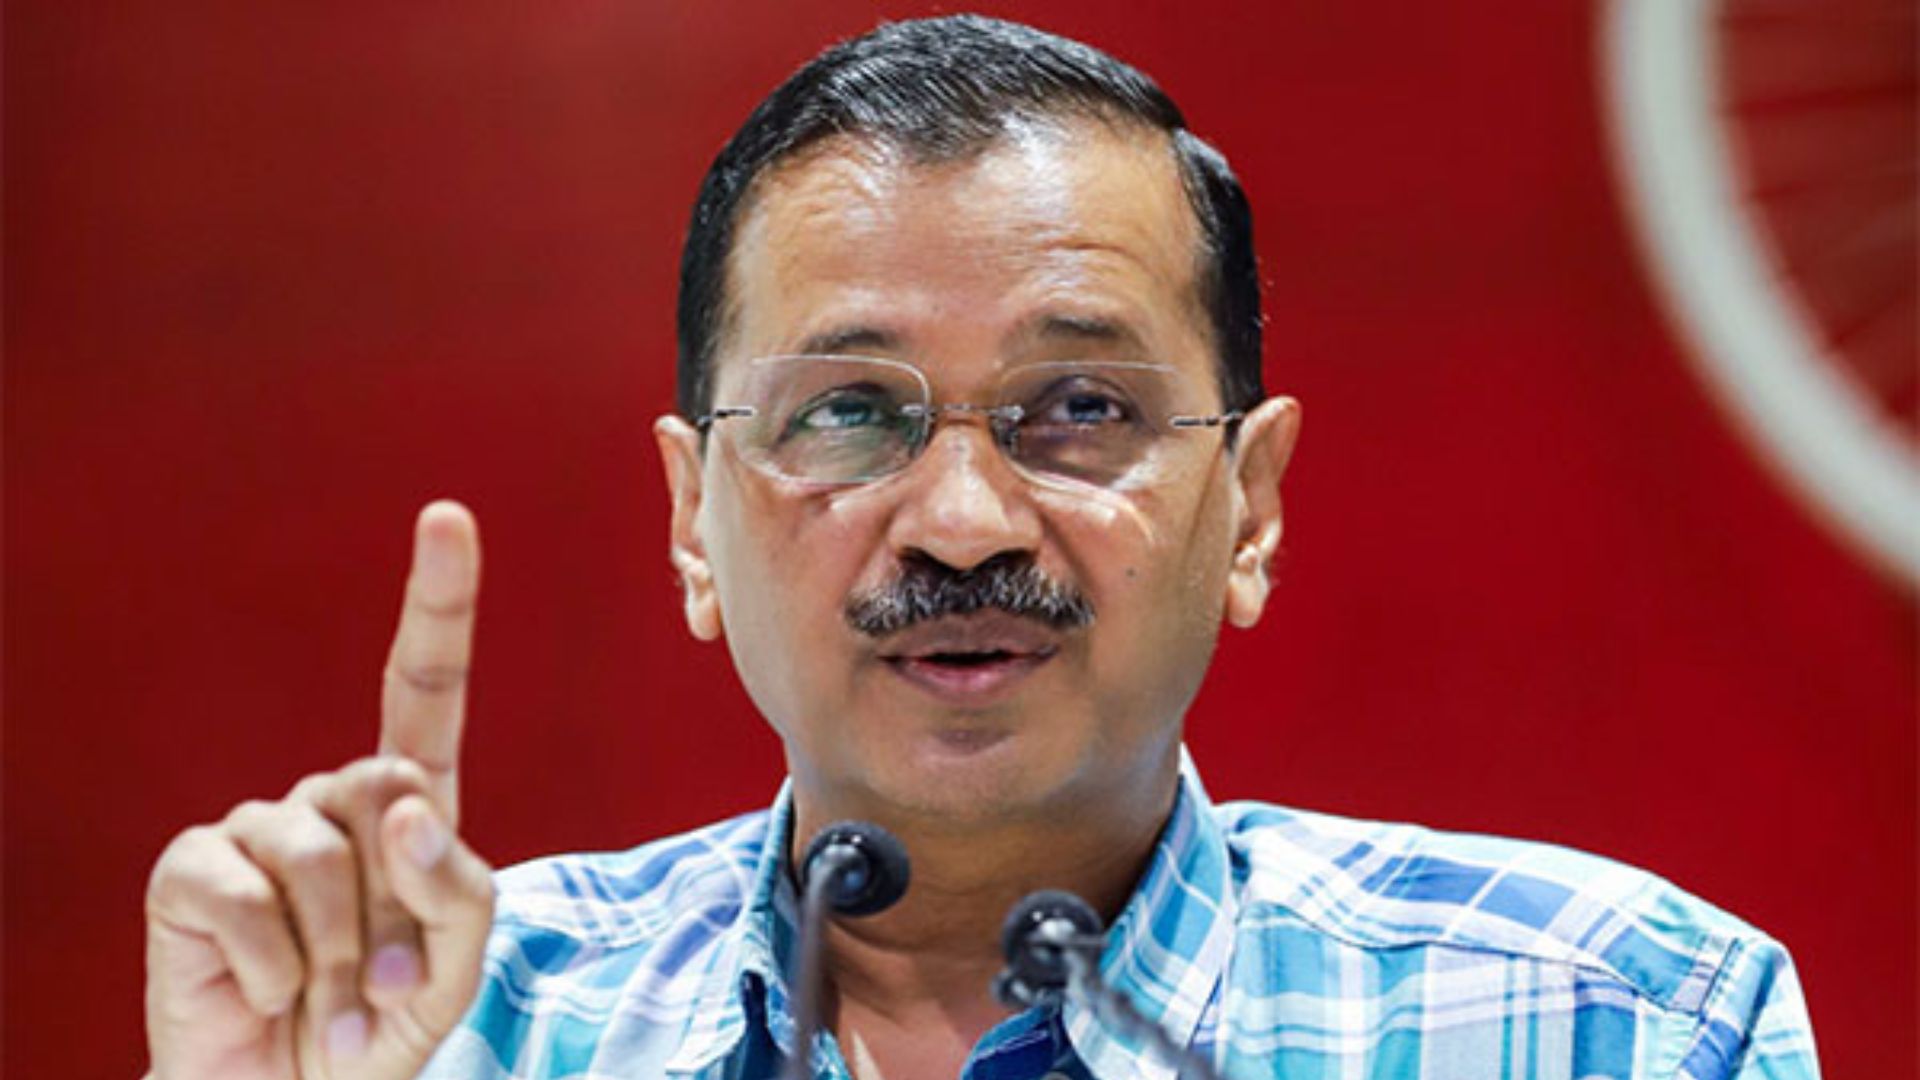 Delhi Excise Policy Case: Kejriwal Files Bail Plea; Hearing Expected to Begin At 2 pm Today